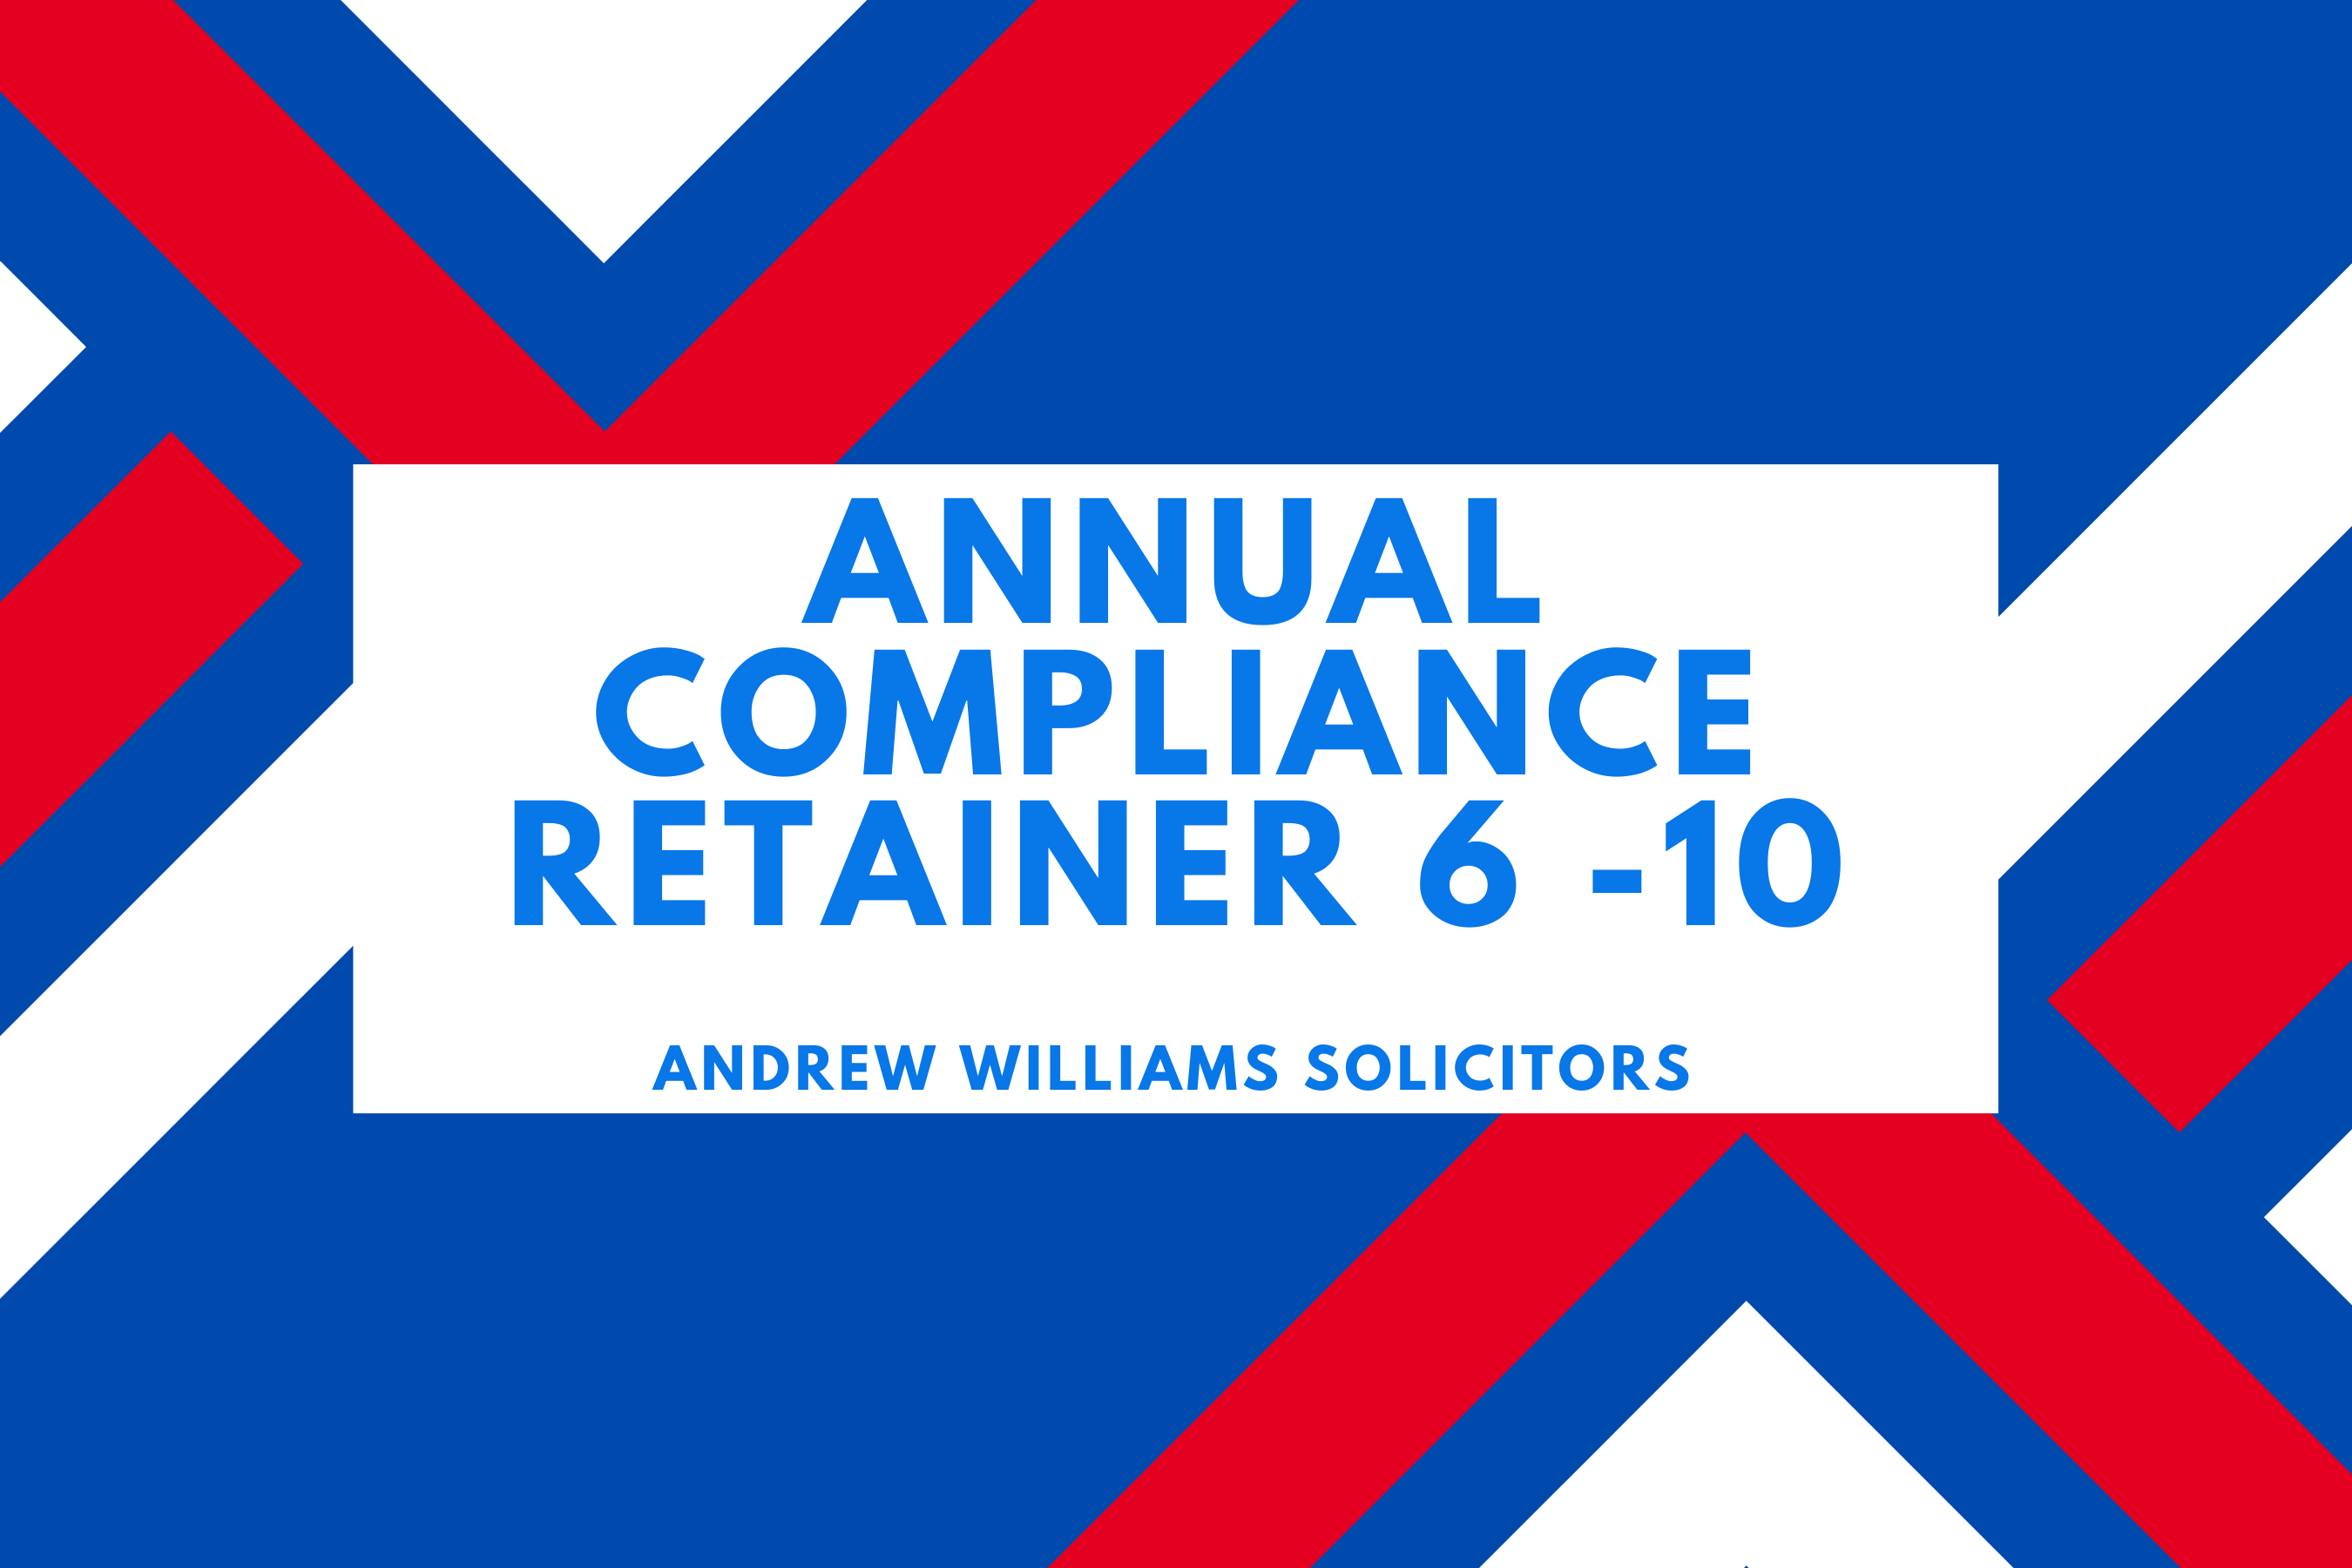 Annual Compliance Retainer 6-10